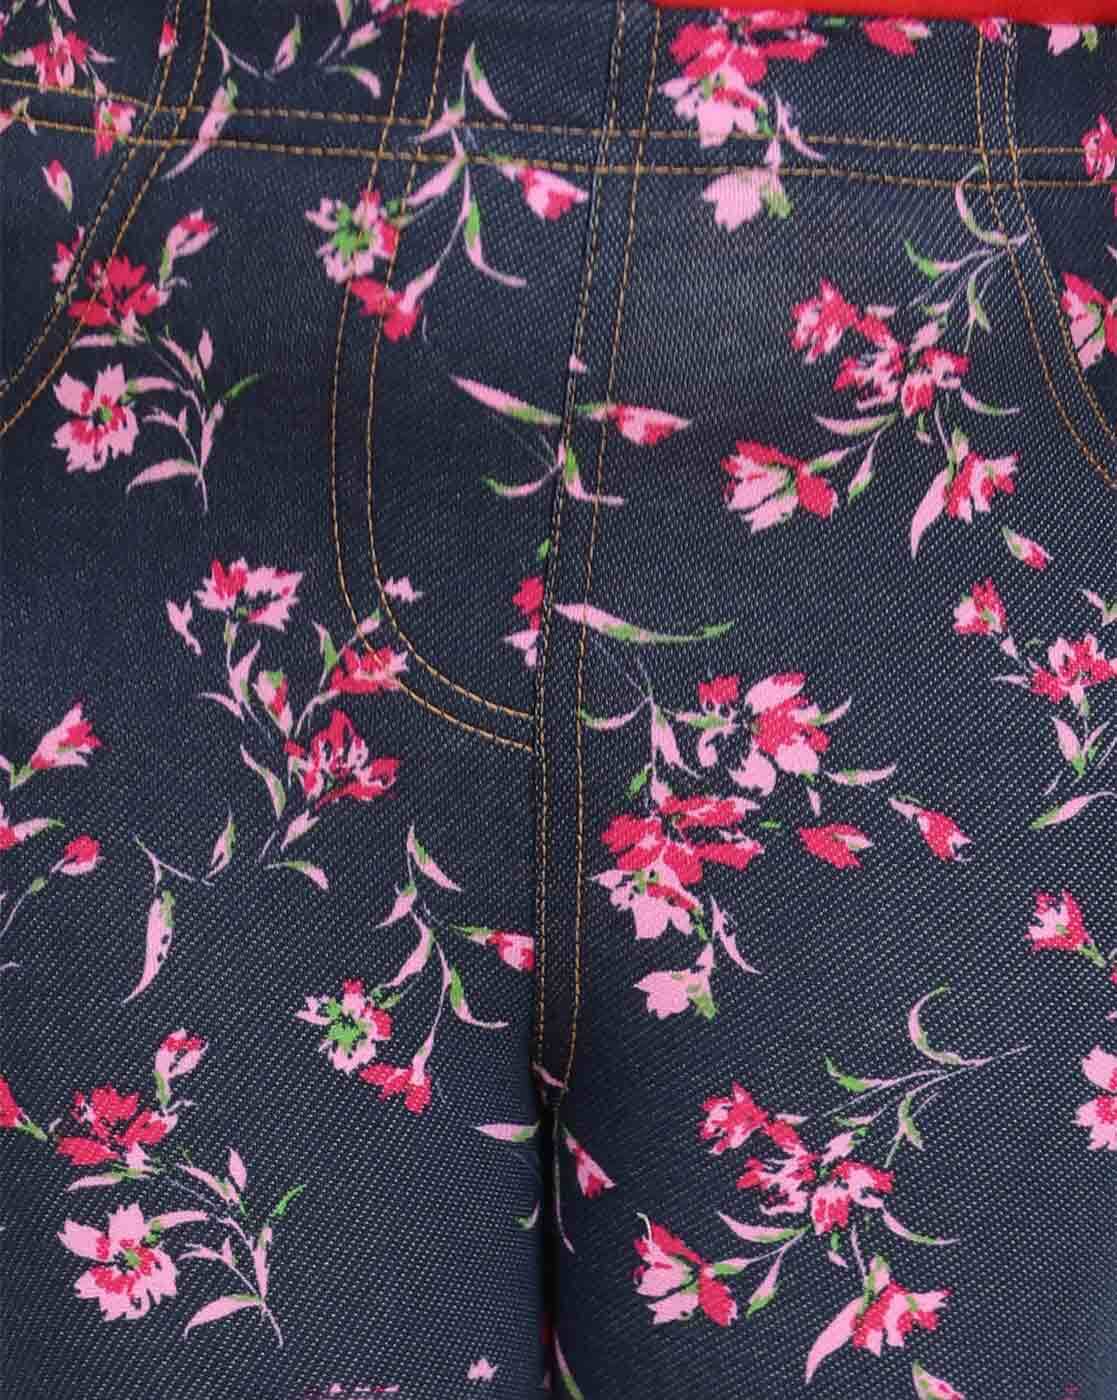 Pack of 2 Floral Print Leggings with Insert Pockets